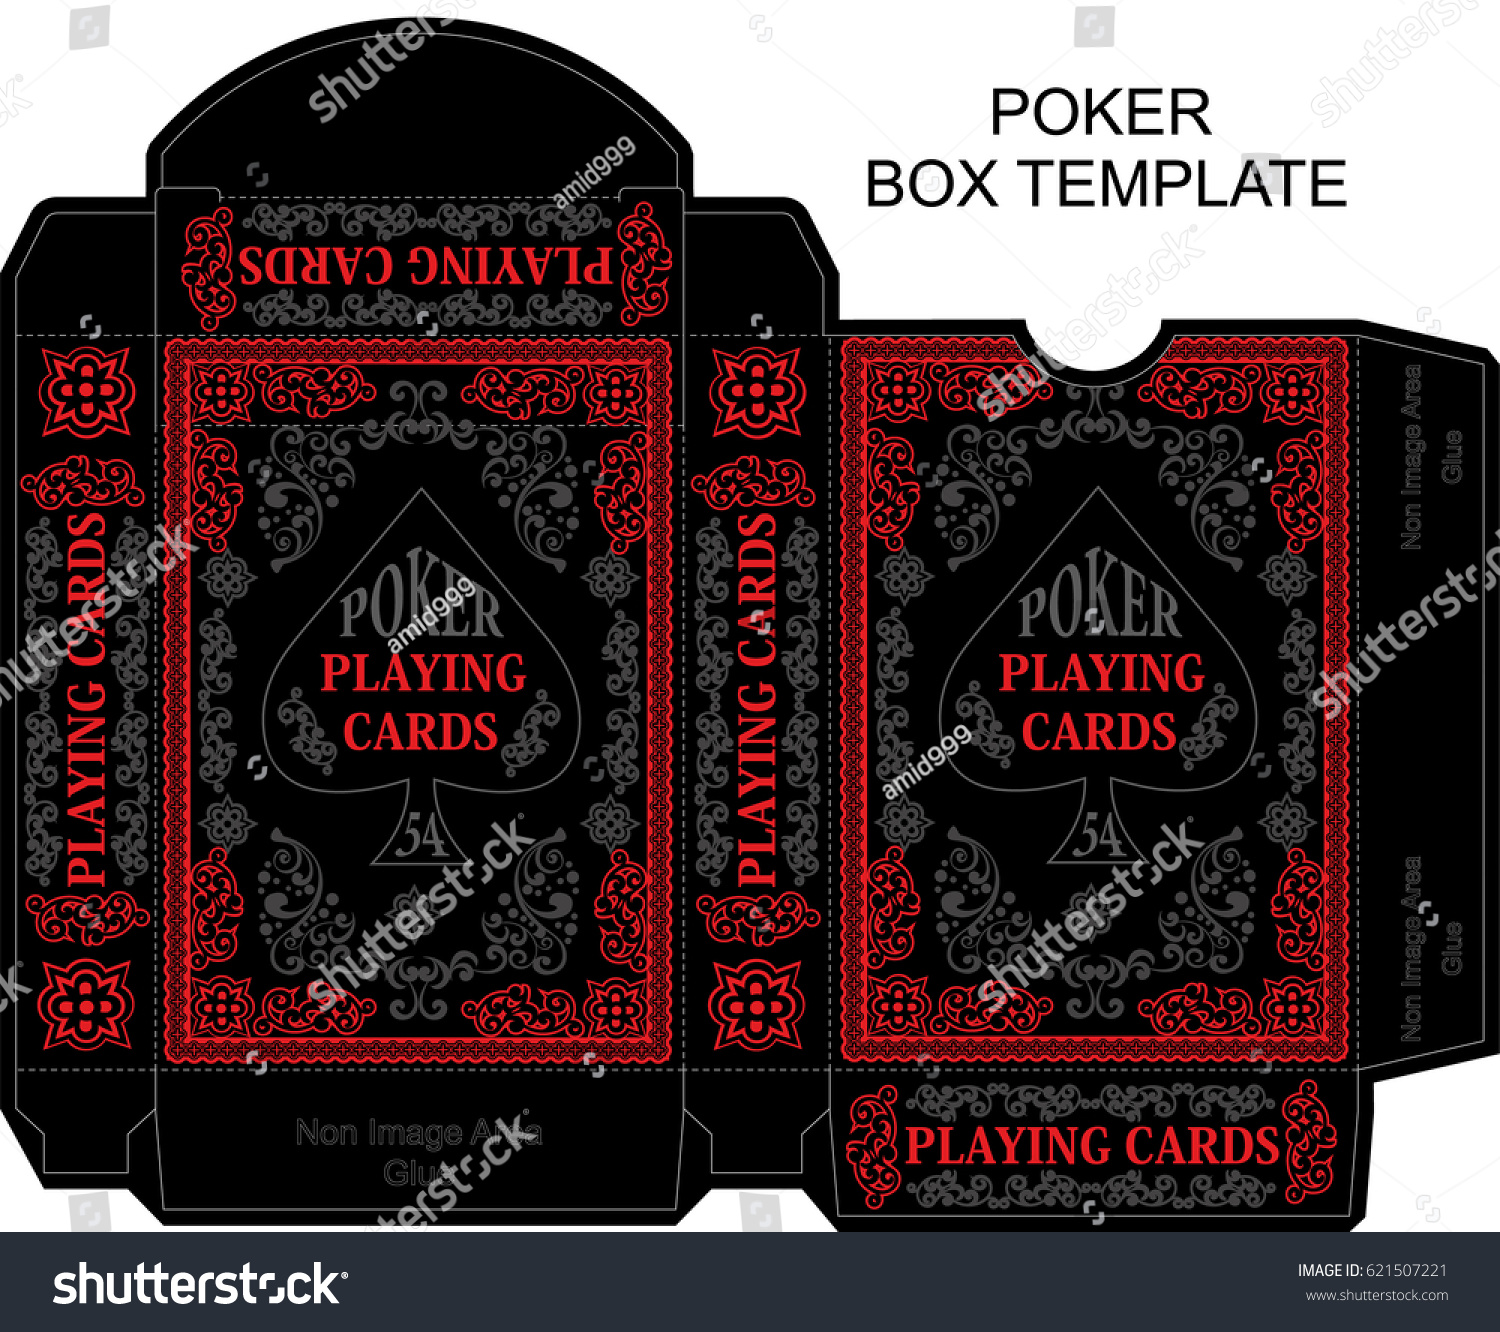 box-template-poker-playing-card-stock-vector-royalty-free-621507221